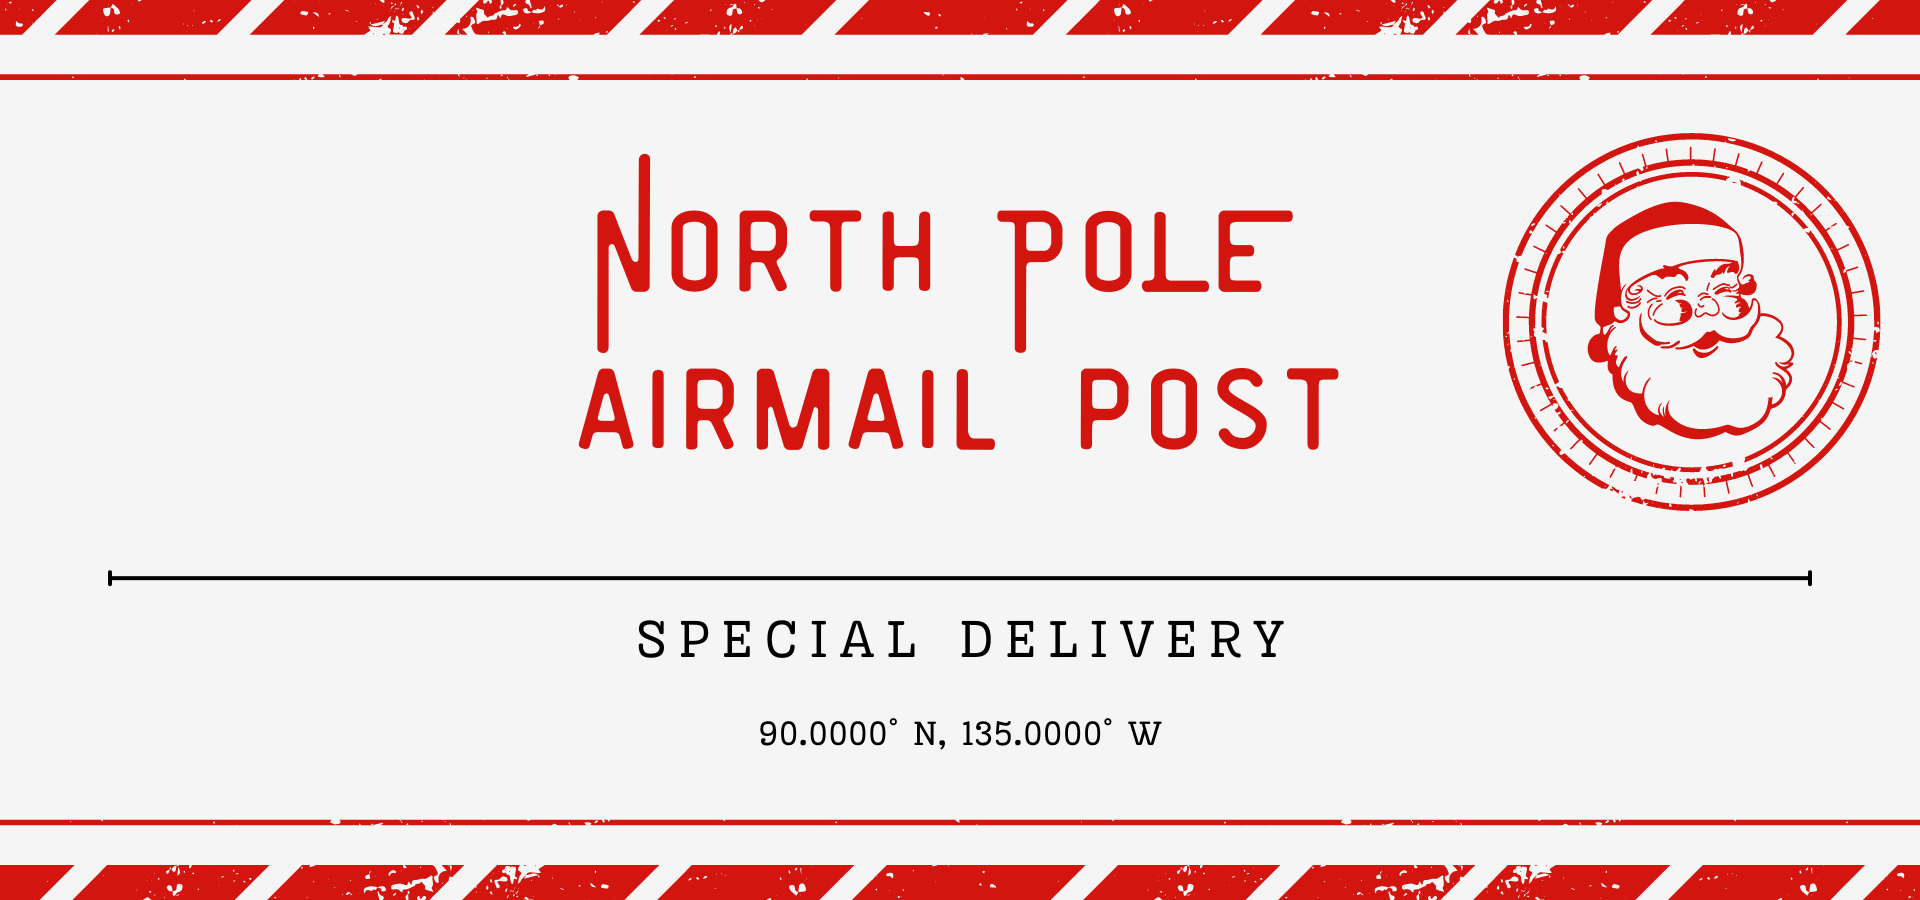 A telegram from the North Pole